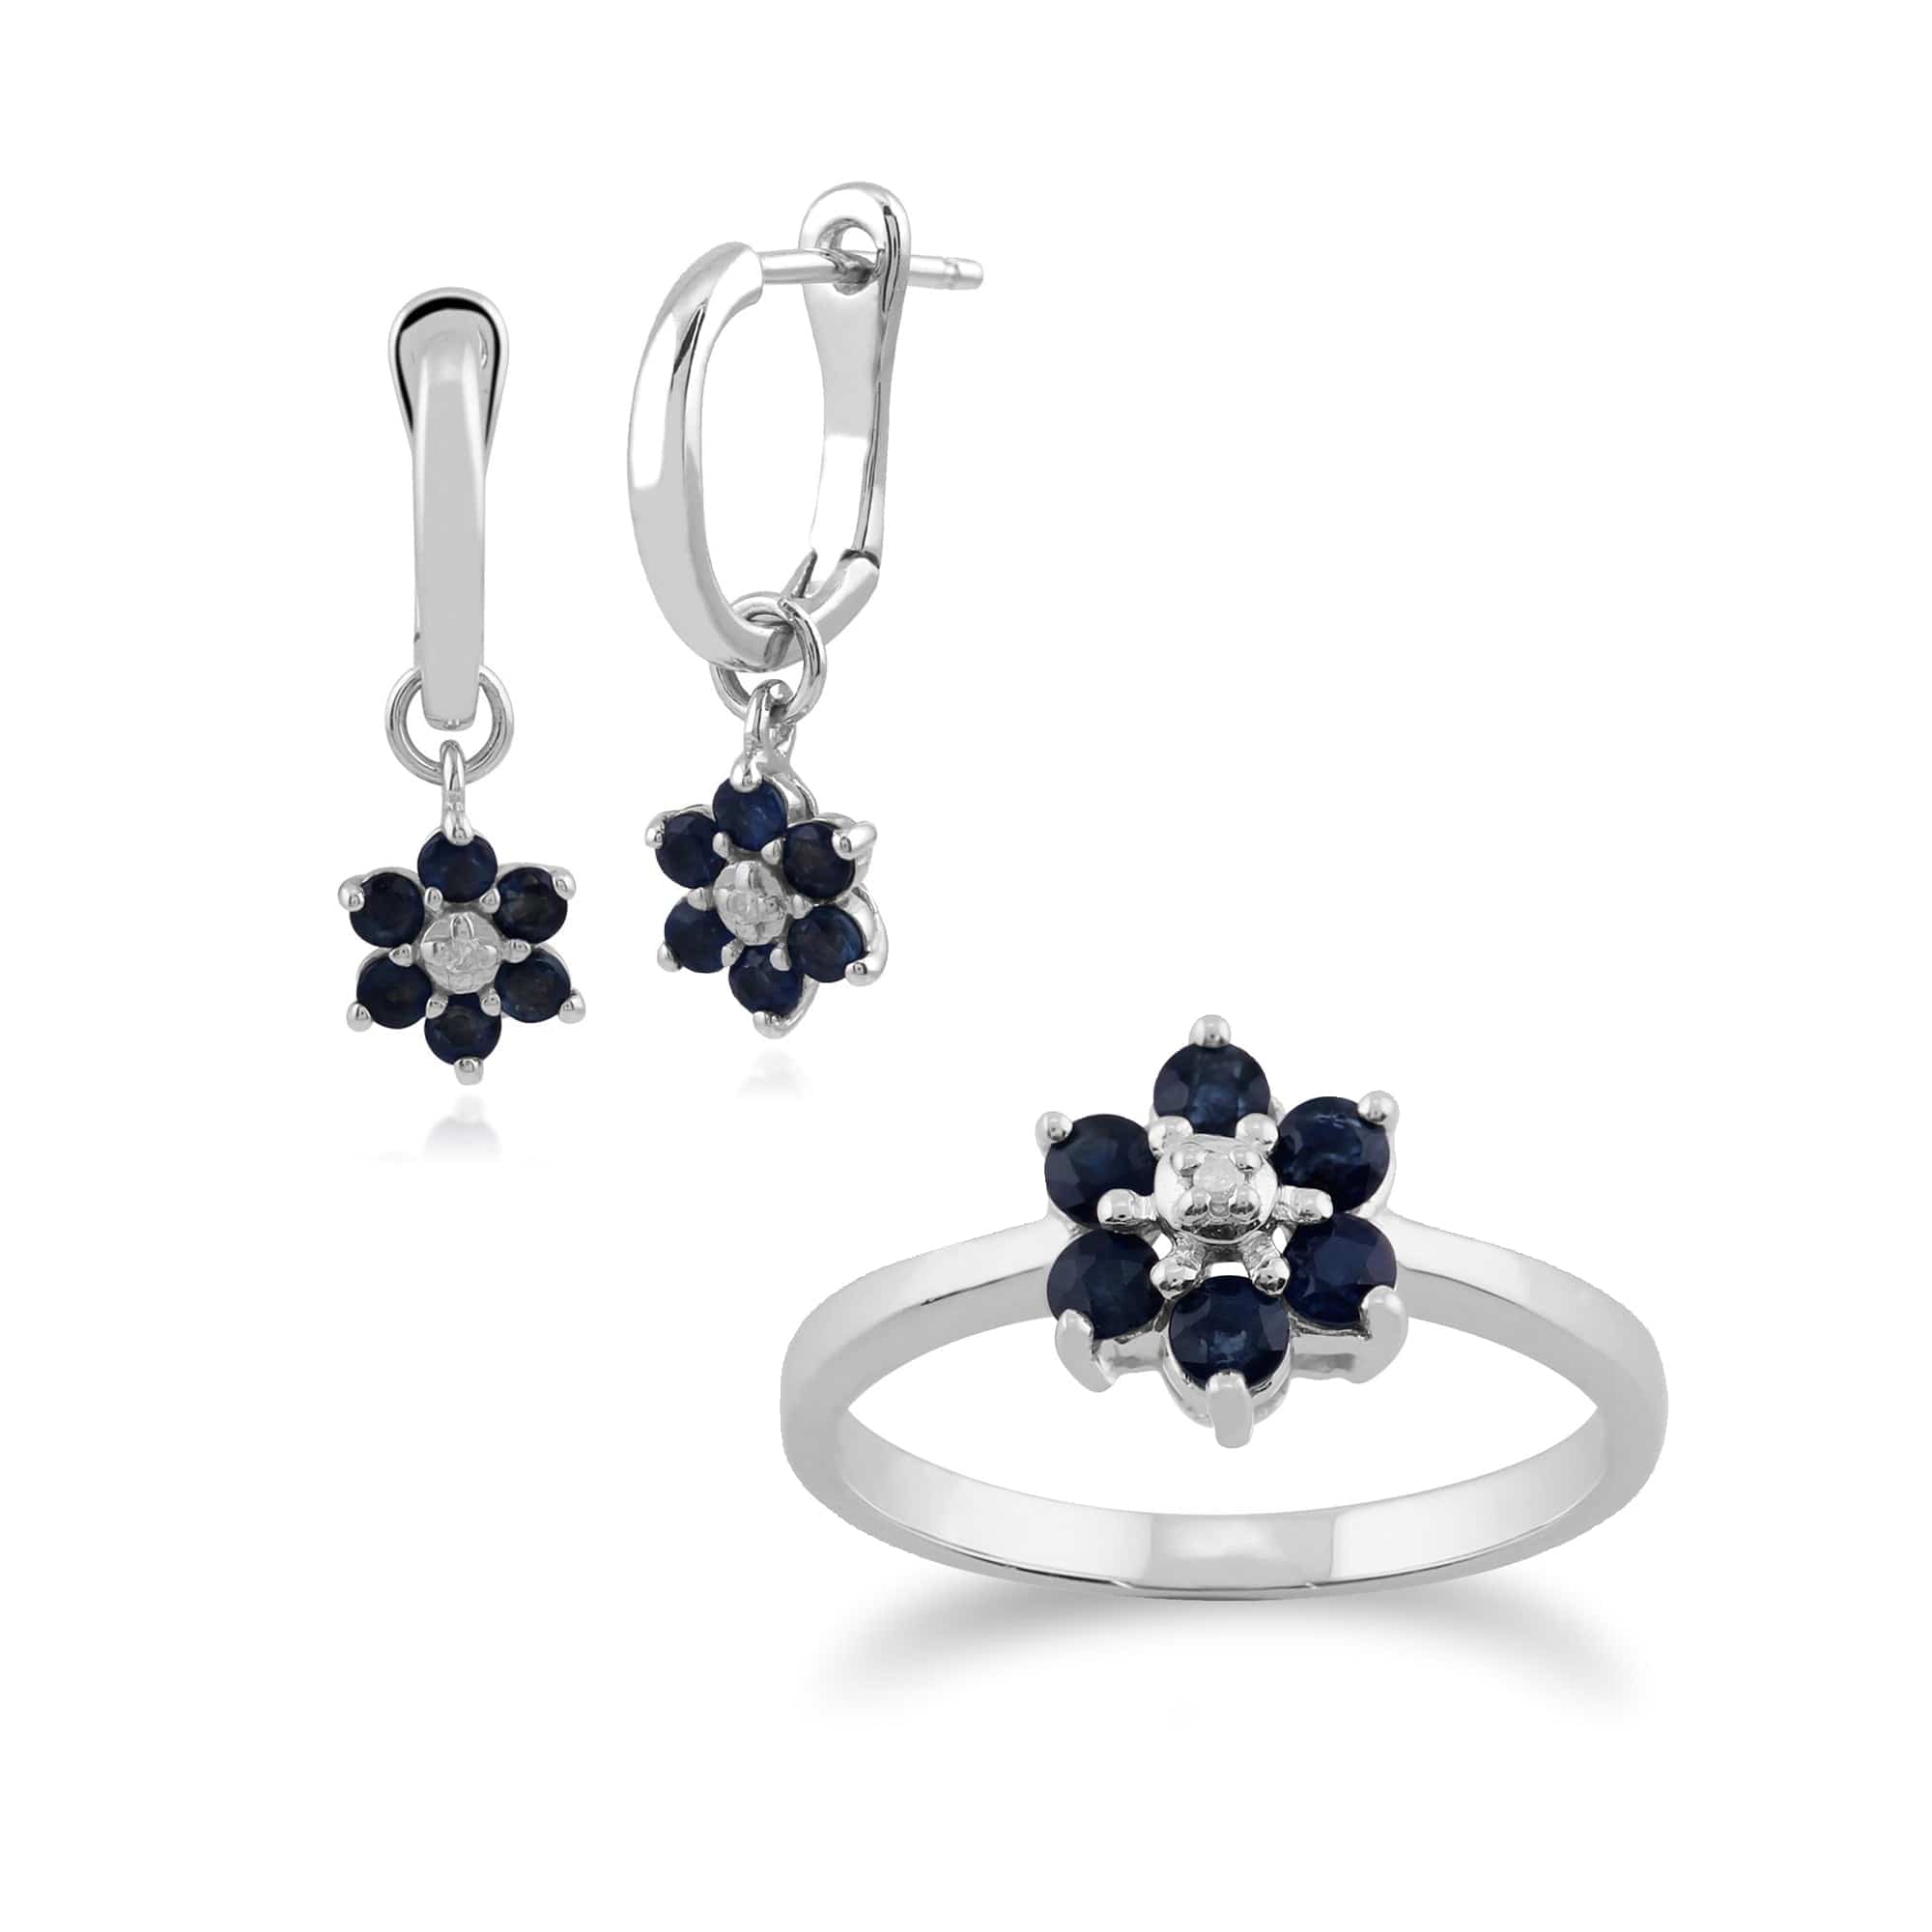 Floral Round Sapphire & Diamond Flower Drop Earrings & Ring Set in 9ct White Gold